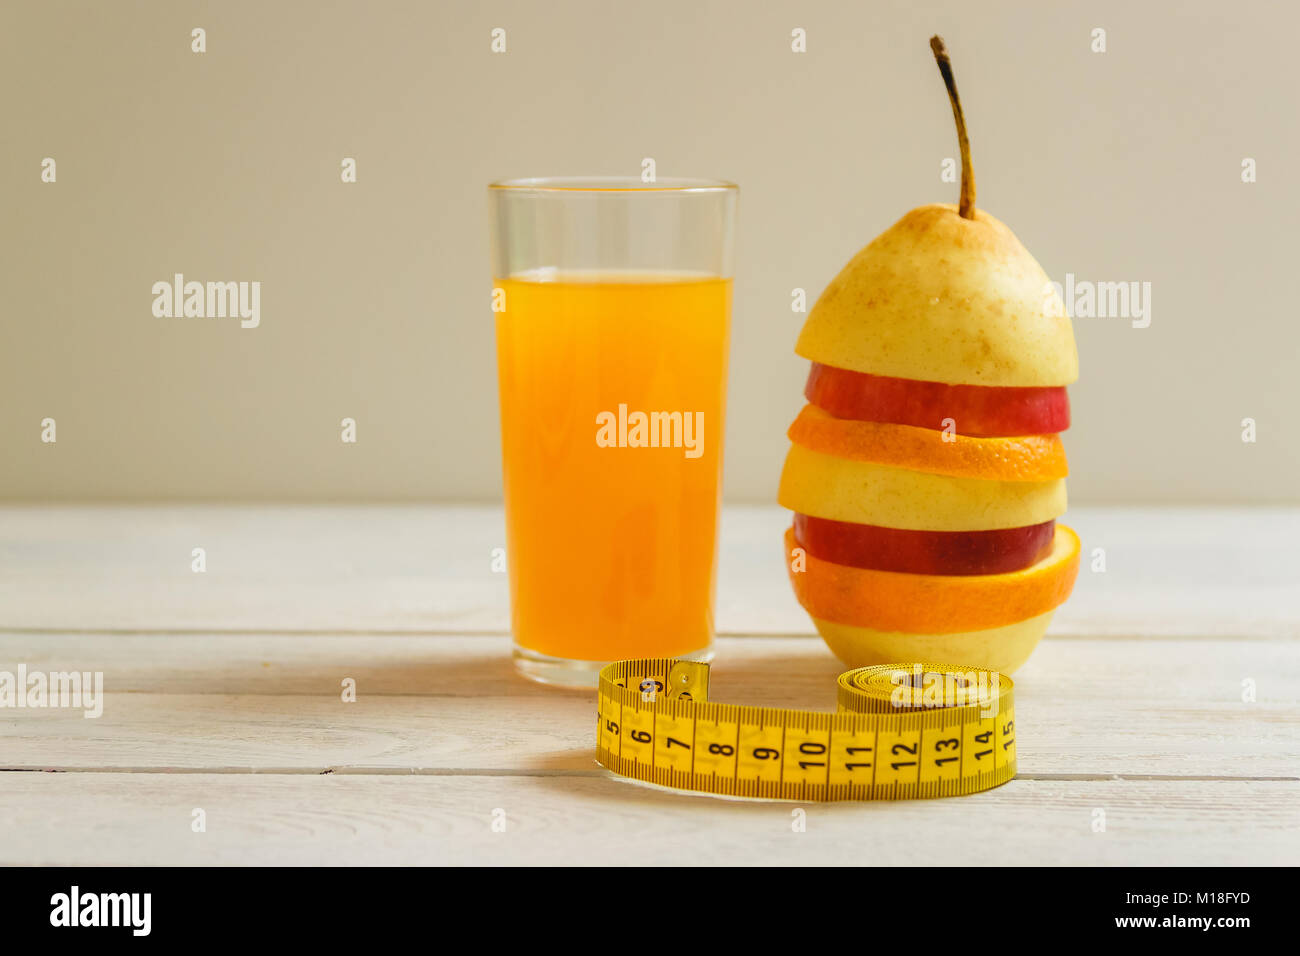 Measure tape and fresh fruit on wooden table. Healthy lifestyle diet with fresh fruits. Stock Photo